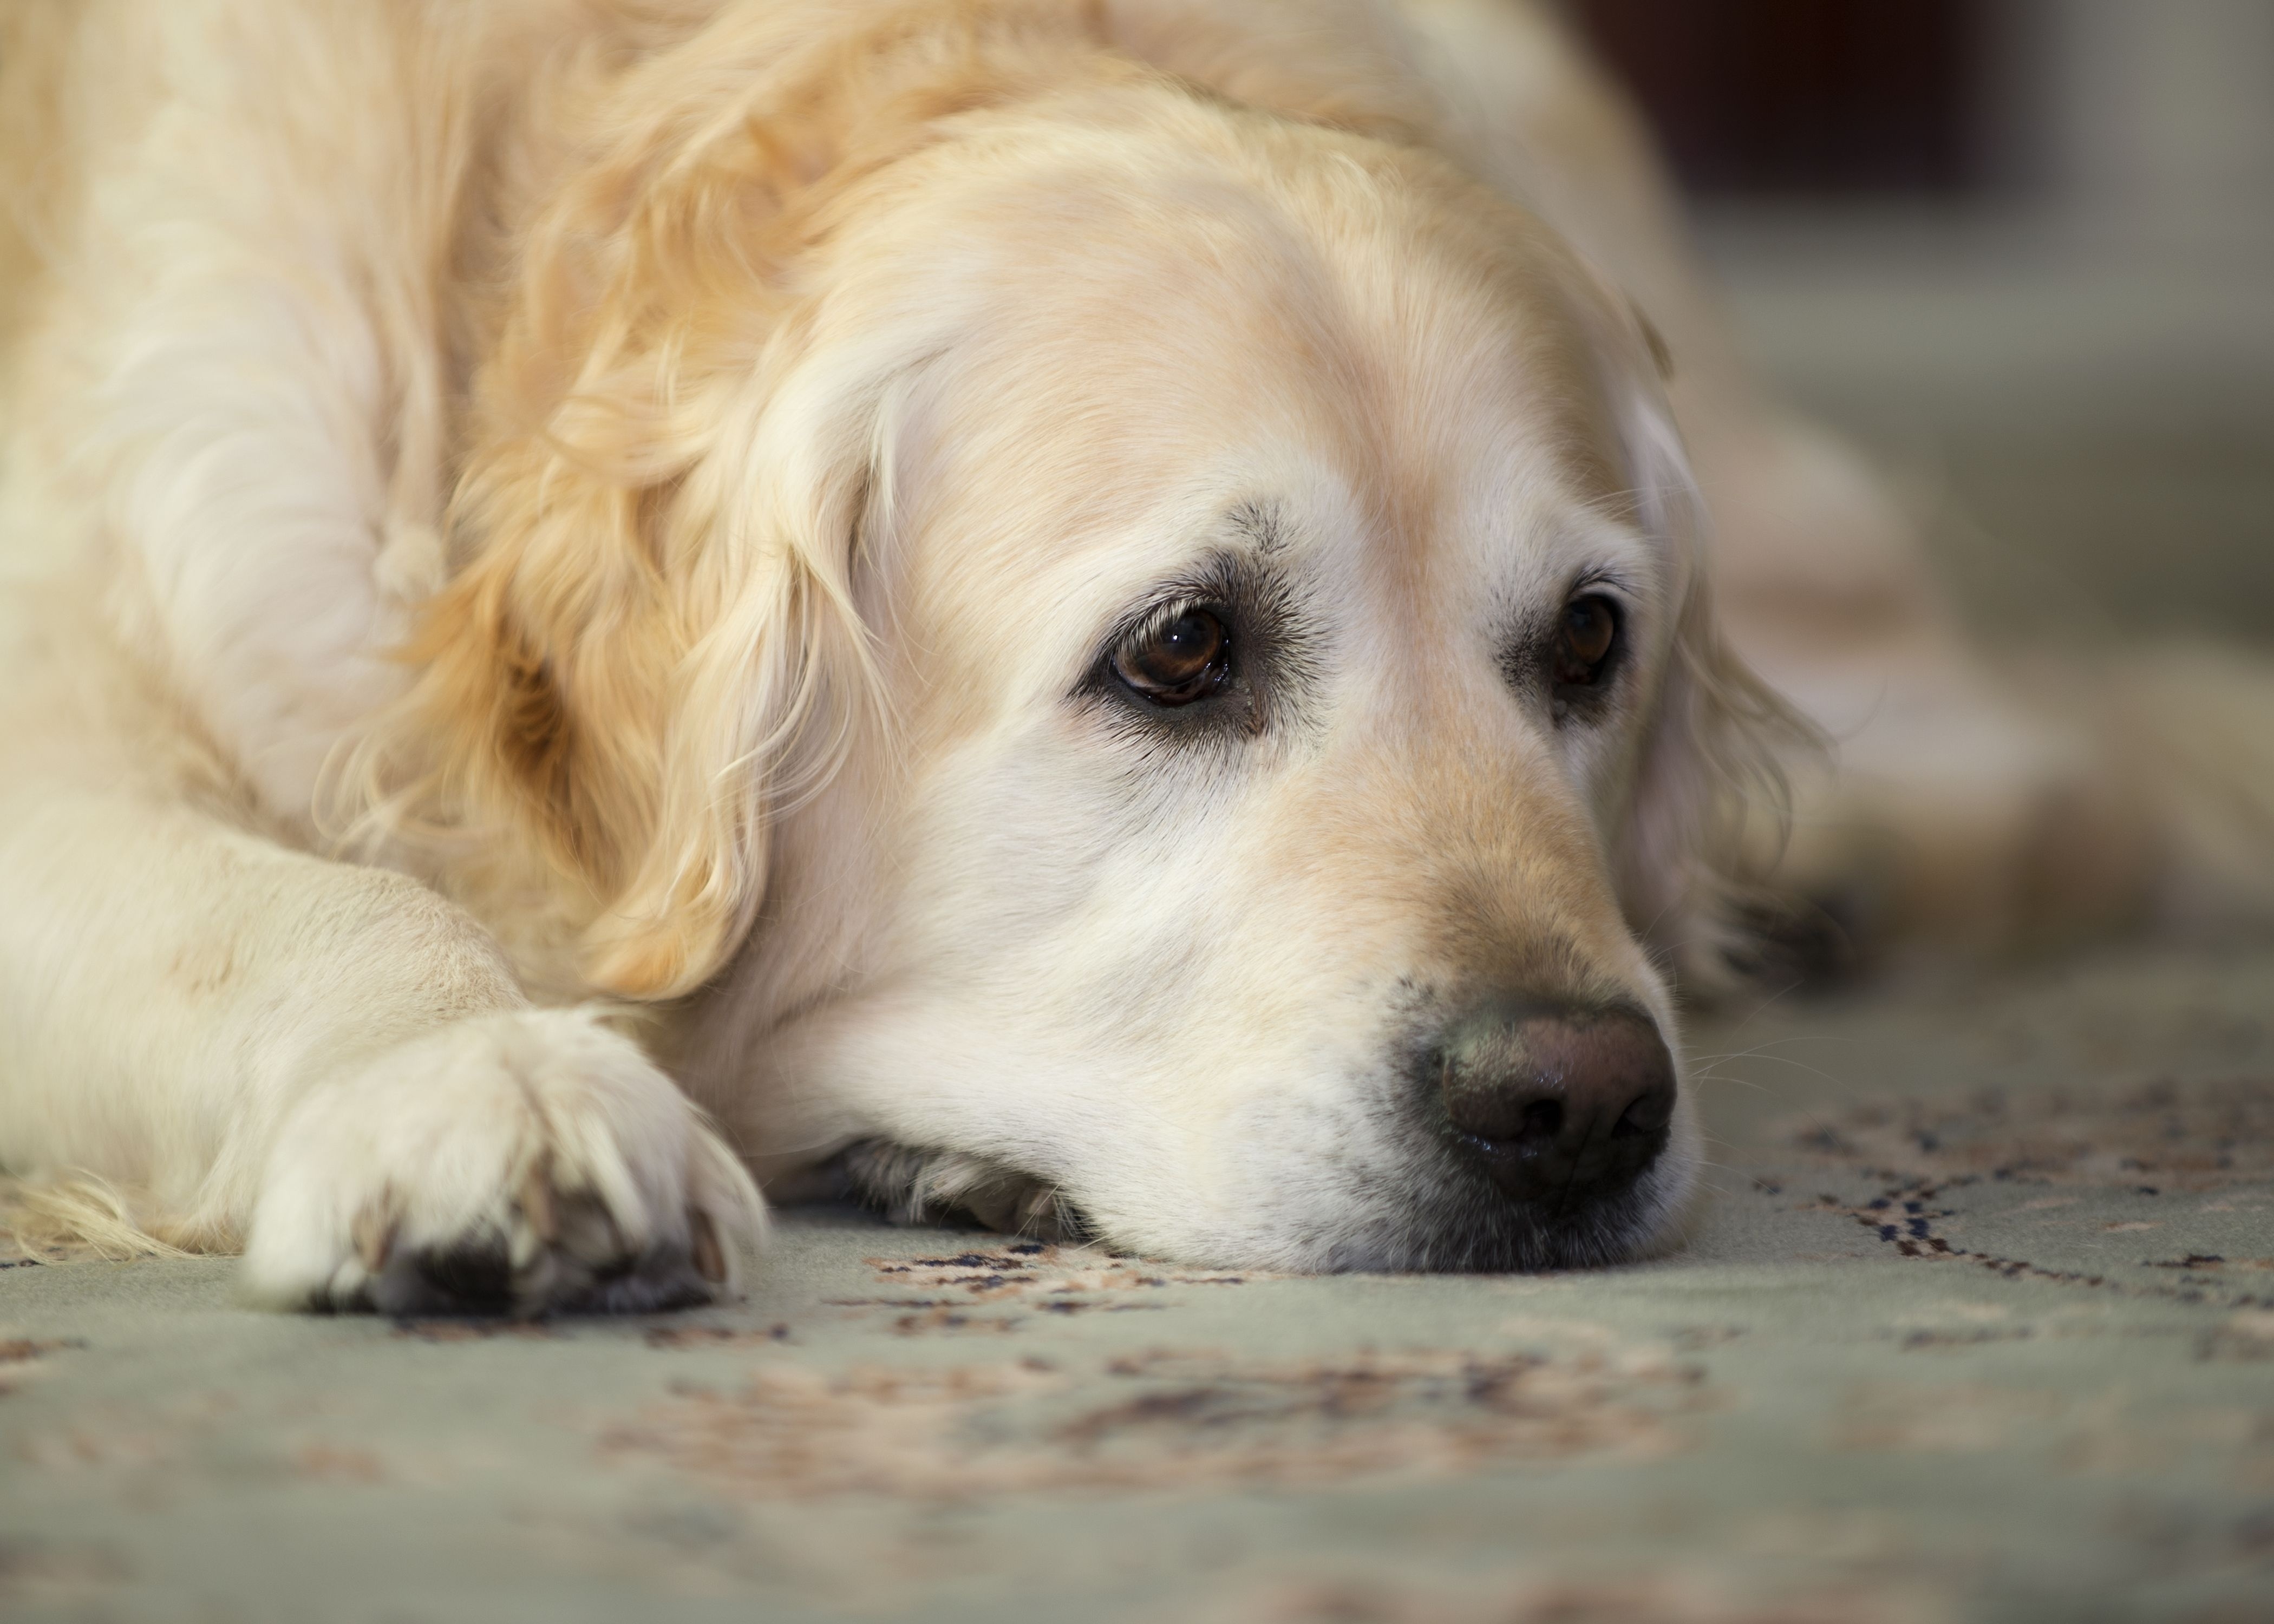 golden retriever, sadness, animals, to lie down, lie, dog, muzzle, nice, sweetheart, sorrow wallpaper for mobile